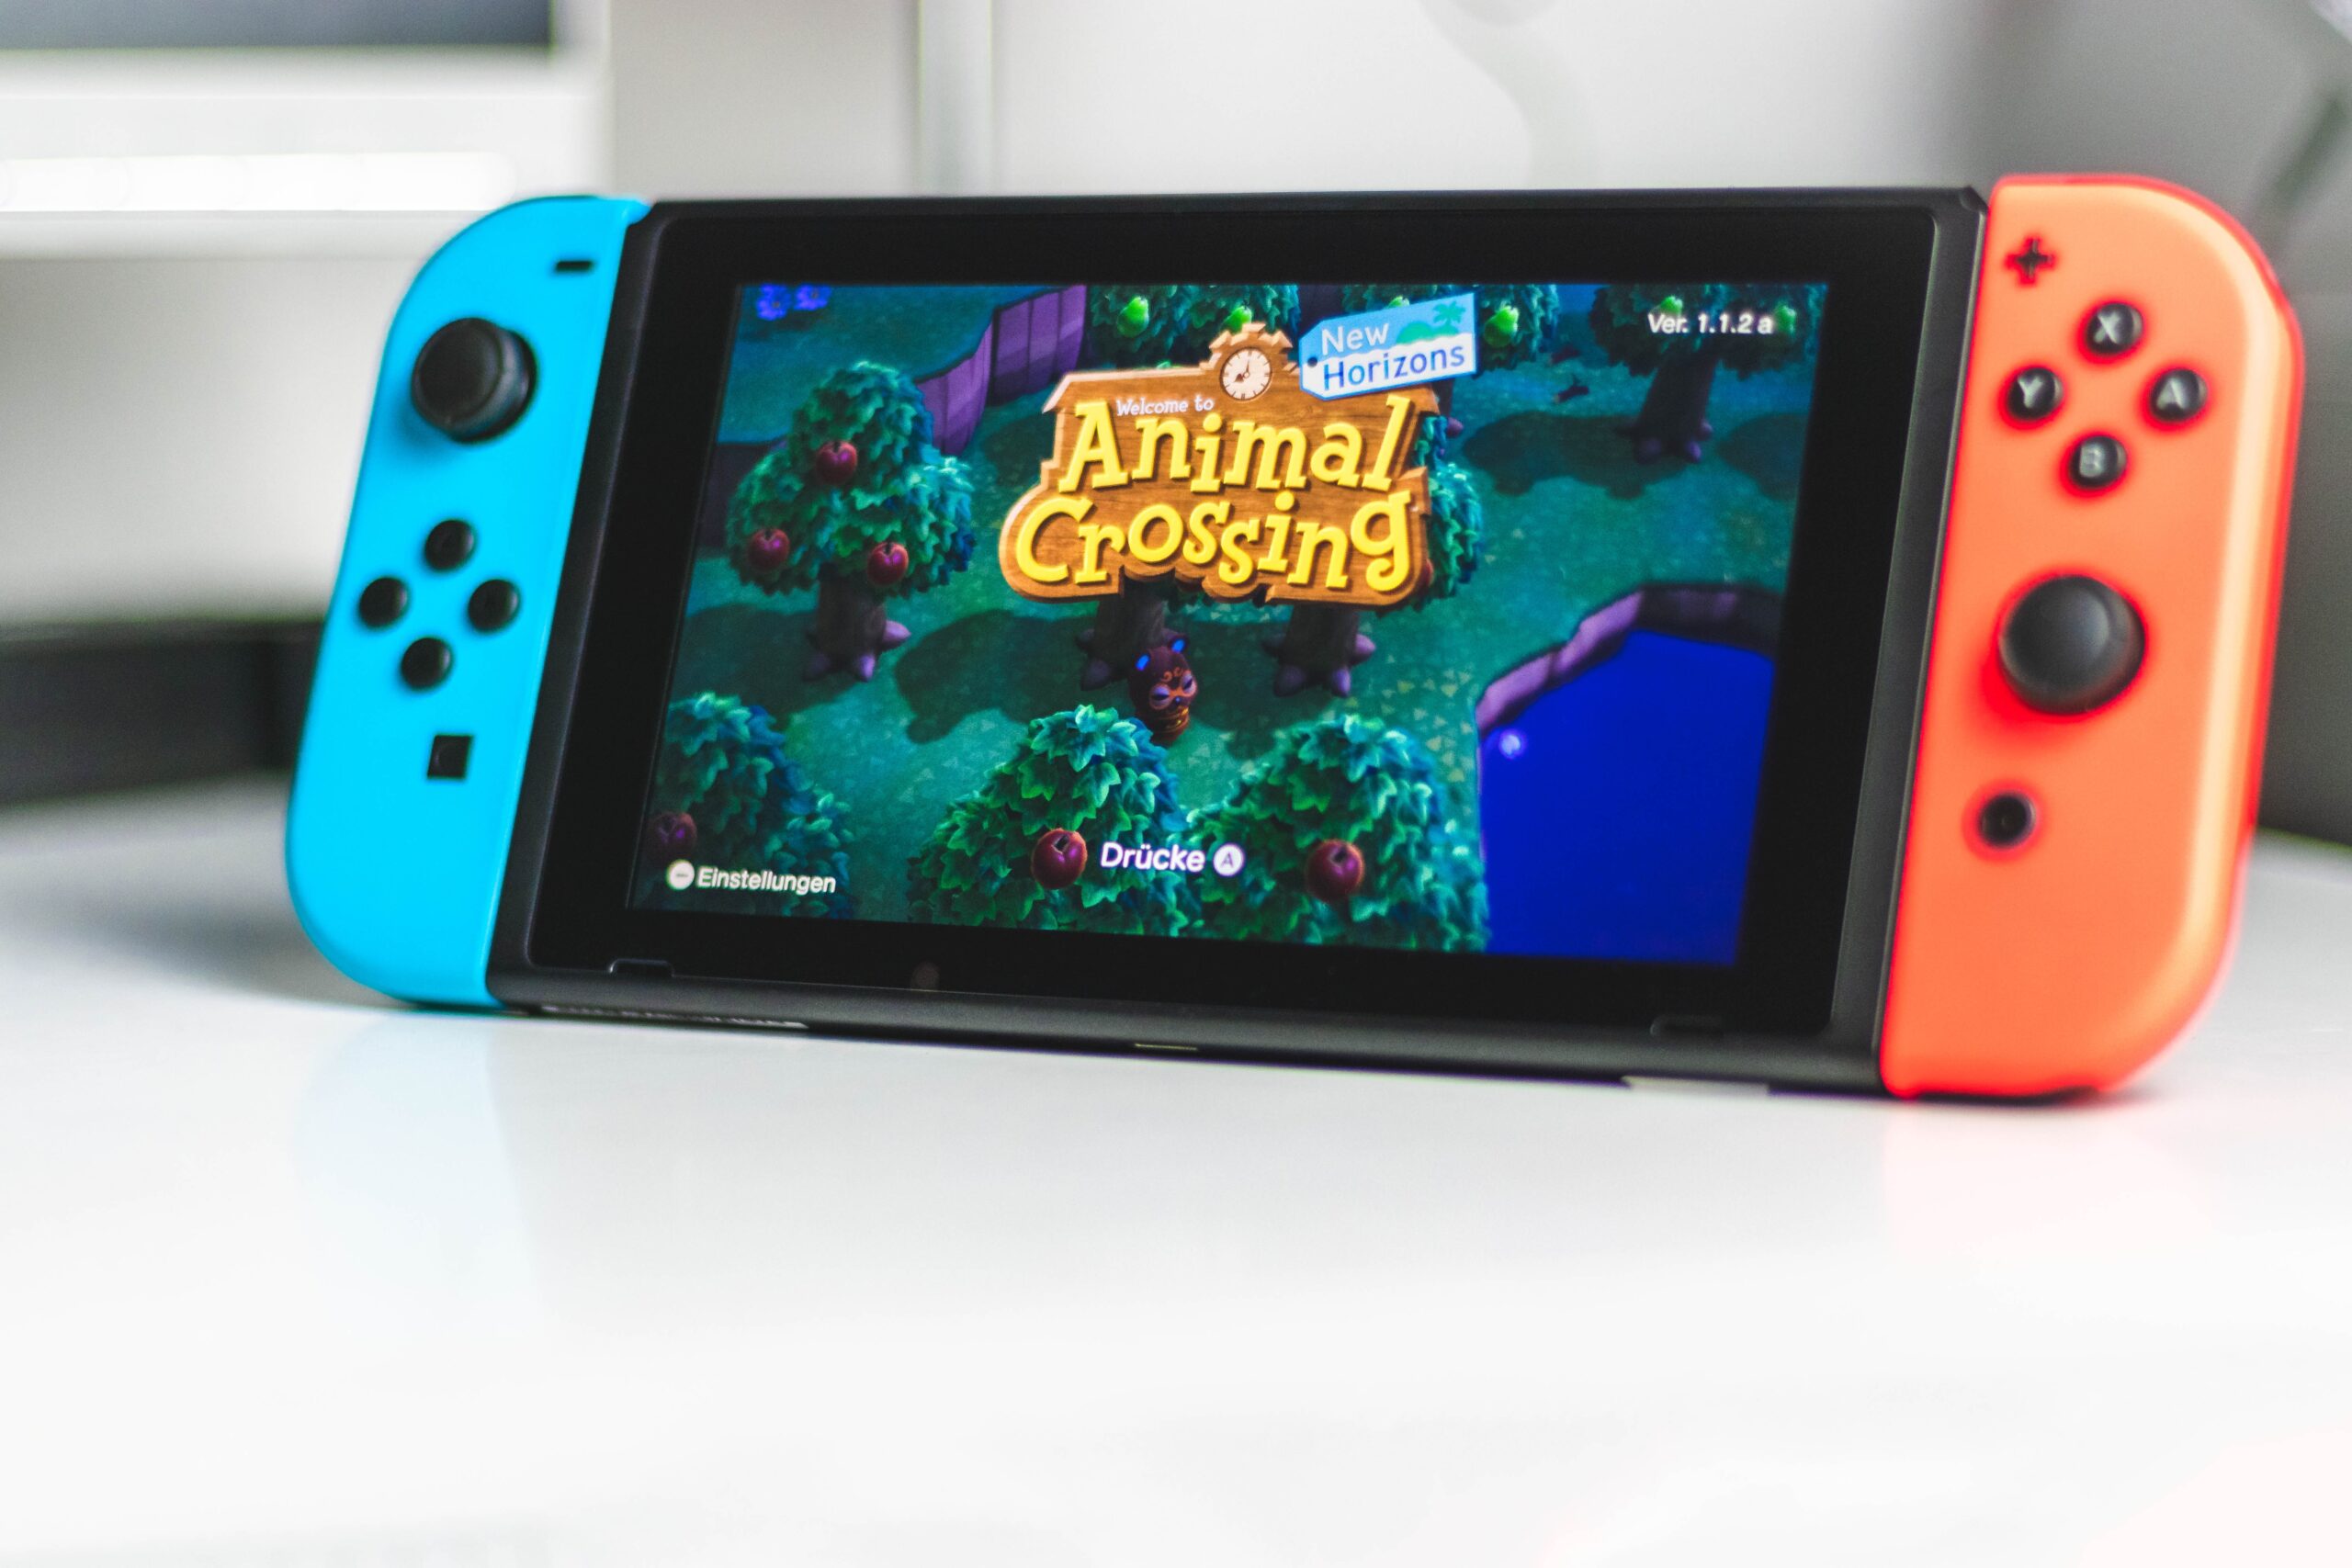 Close up of a Nintendo Switch displaying the menu screen for Animal Crossing